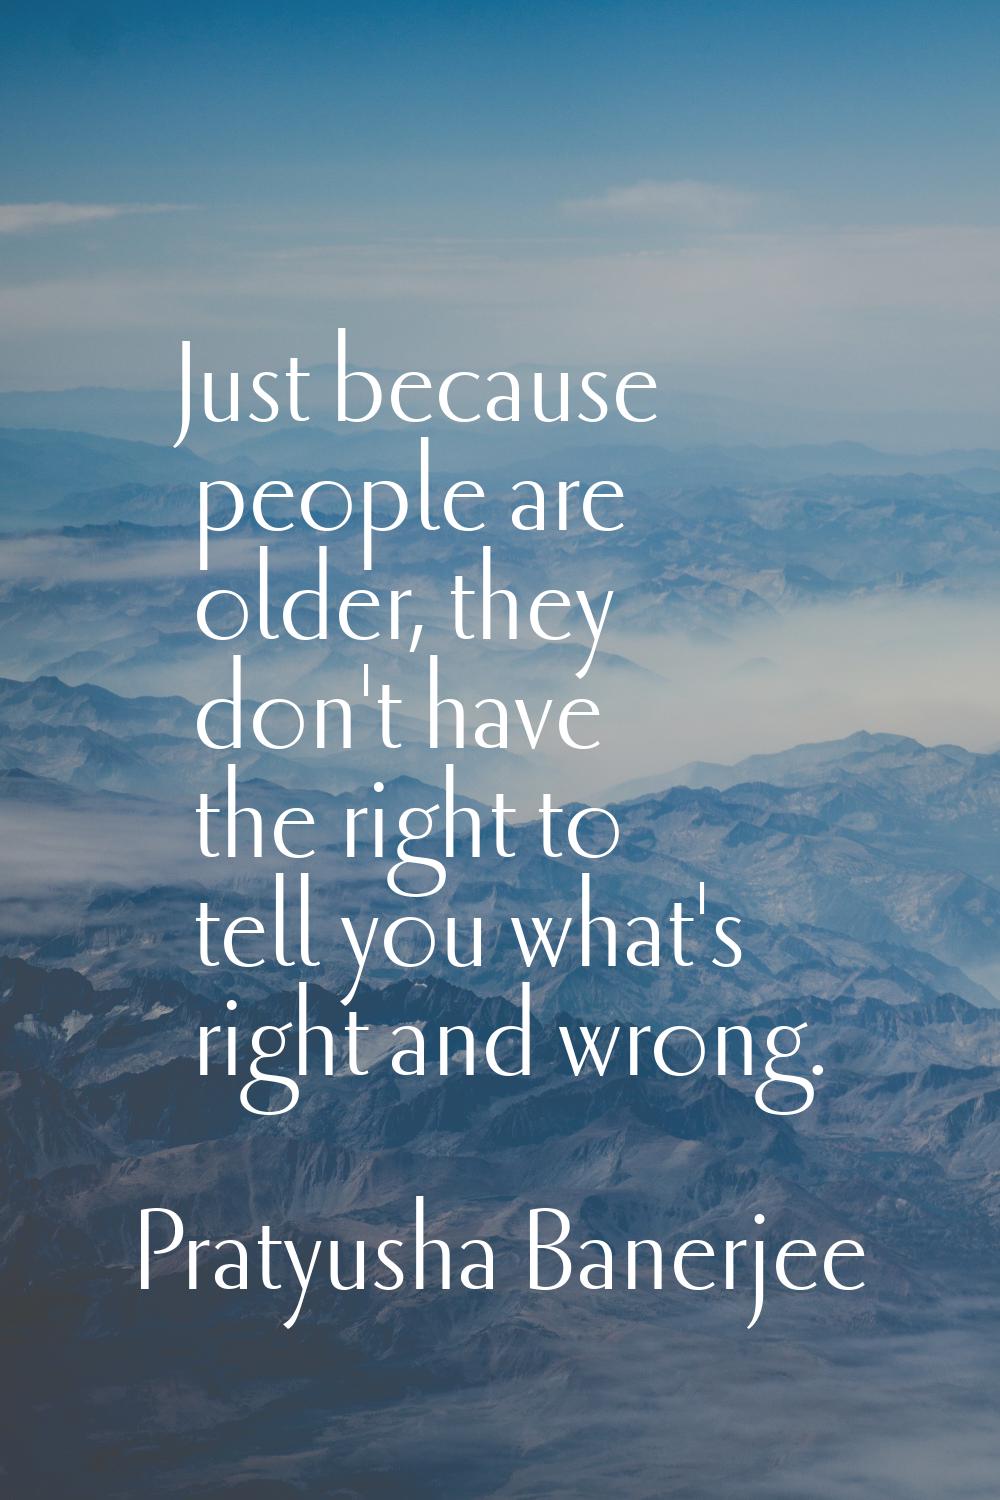 Just because people are older, they don't have the right to tell you what's right and wrong.